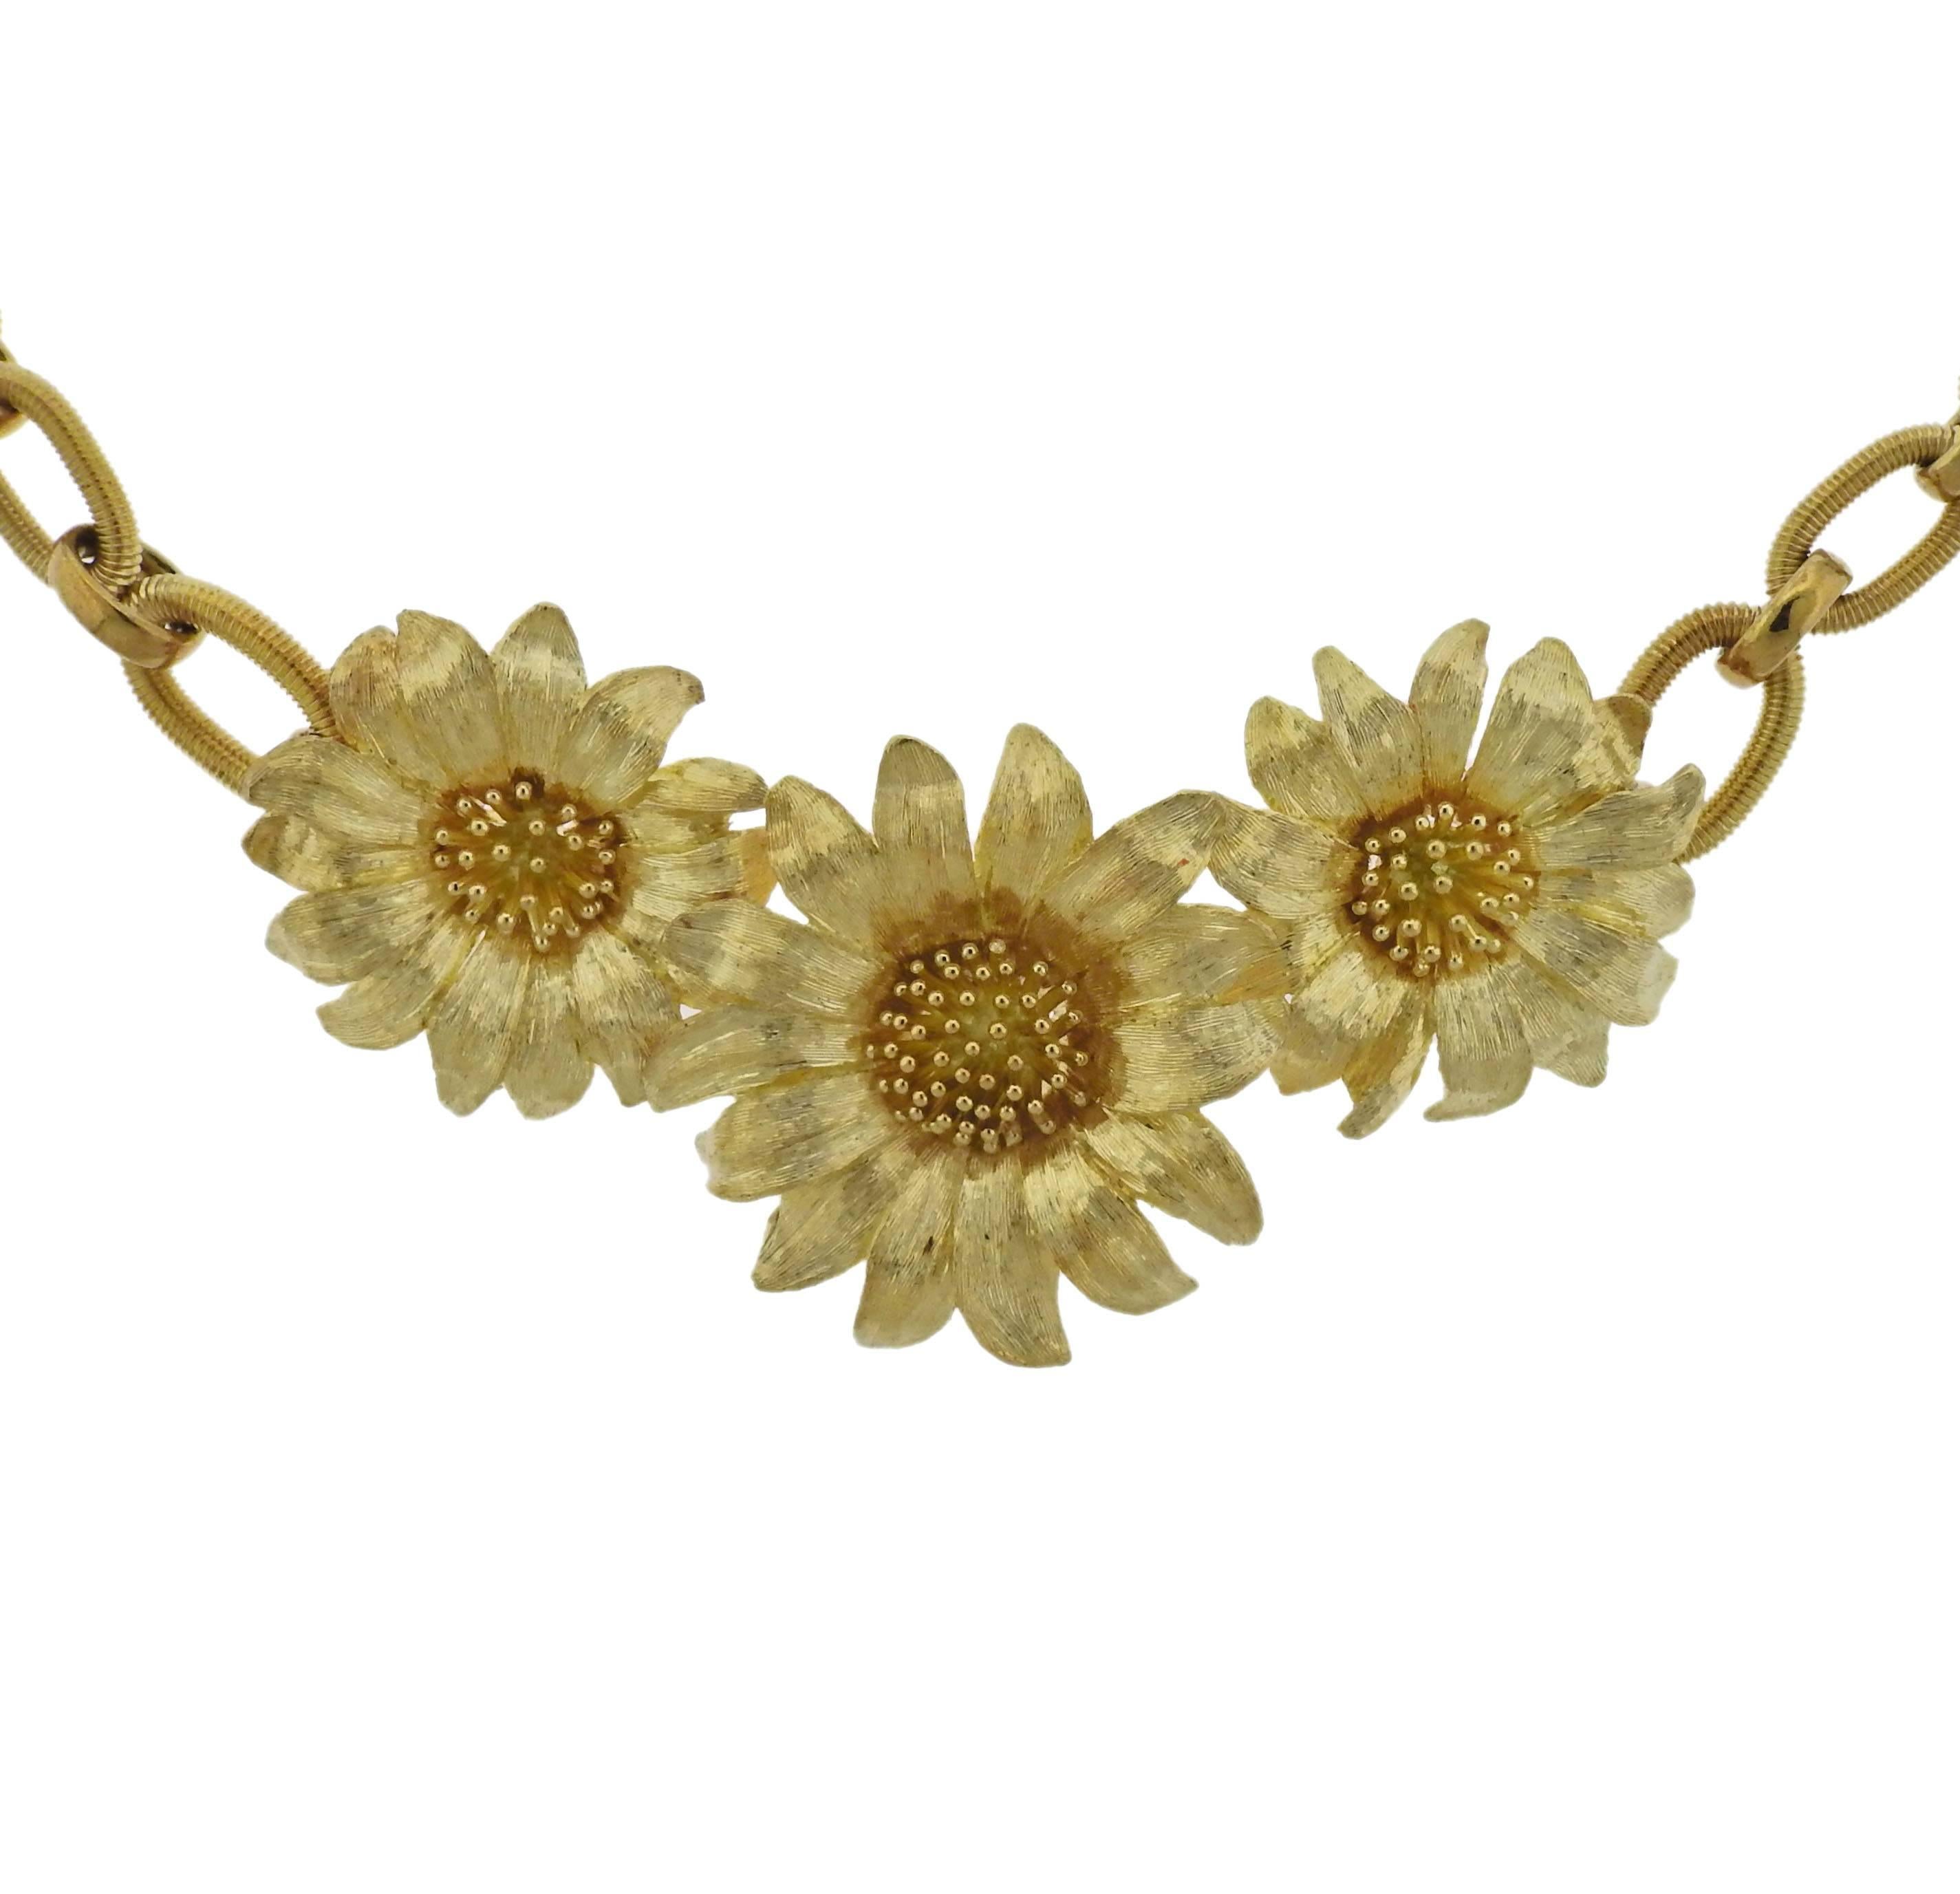  18k yellow gold sunflower necklace, crafted by Bielka. Necklace is 16.5